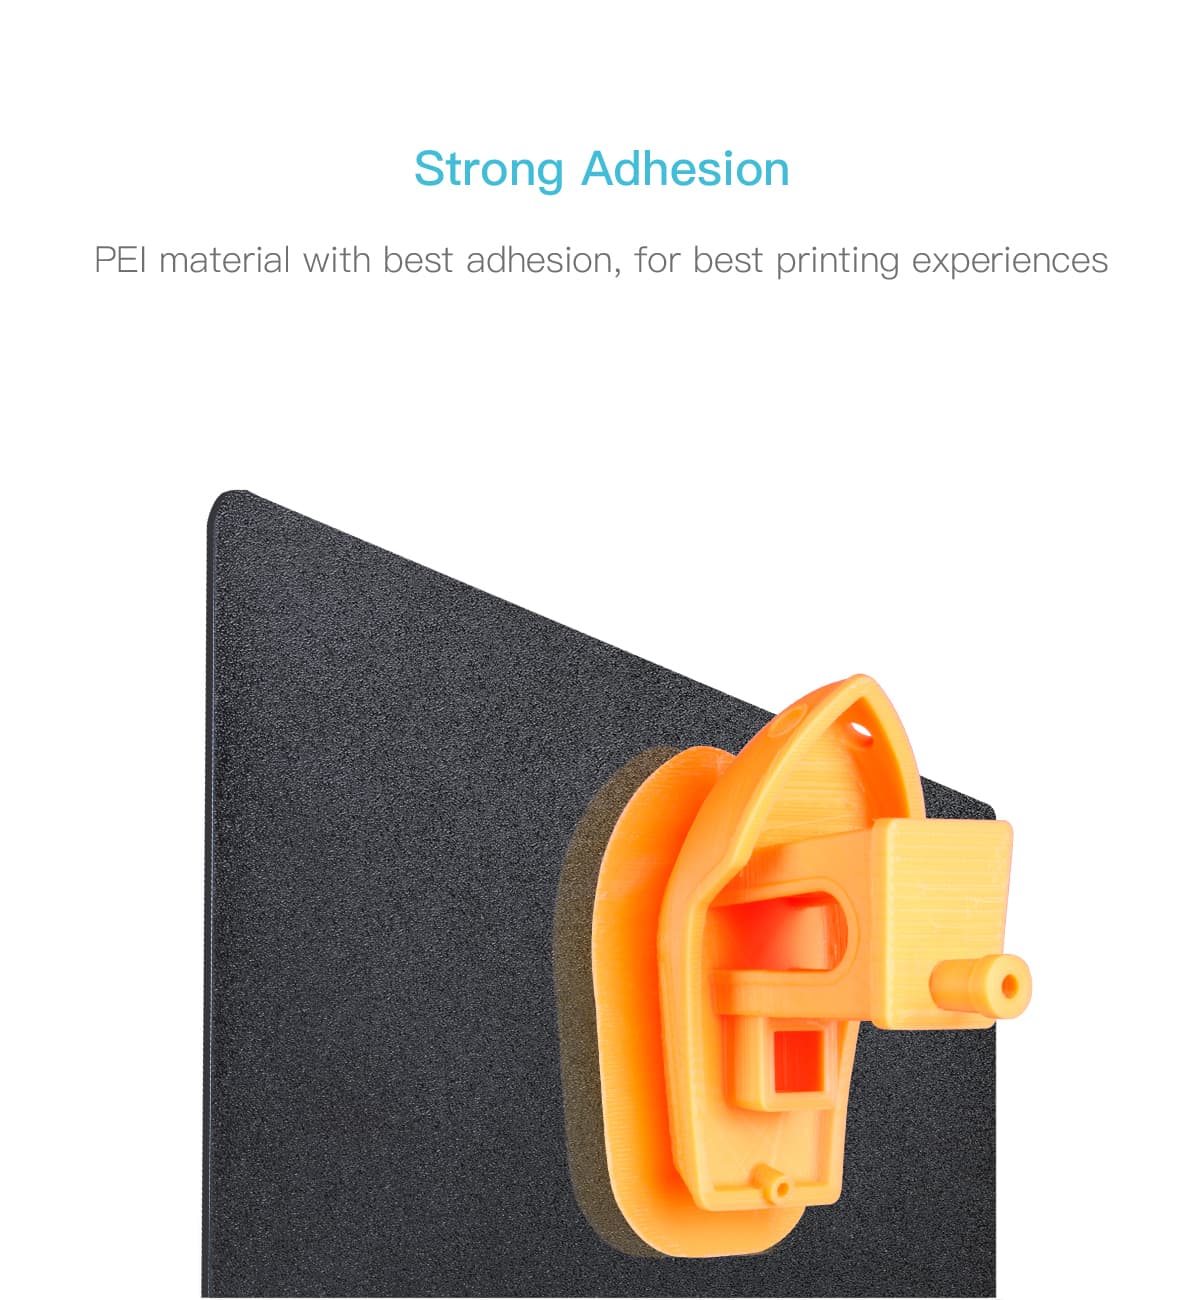 Strong adhesion using PEI magnetic Flexible Plate / Sheet by Creality.